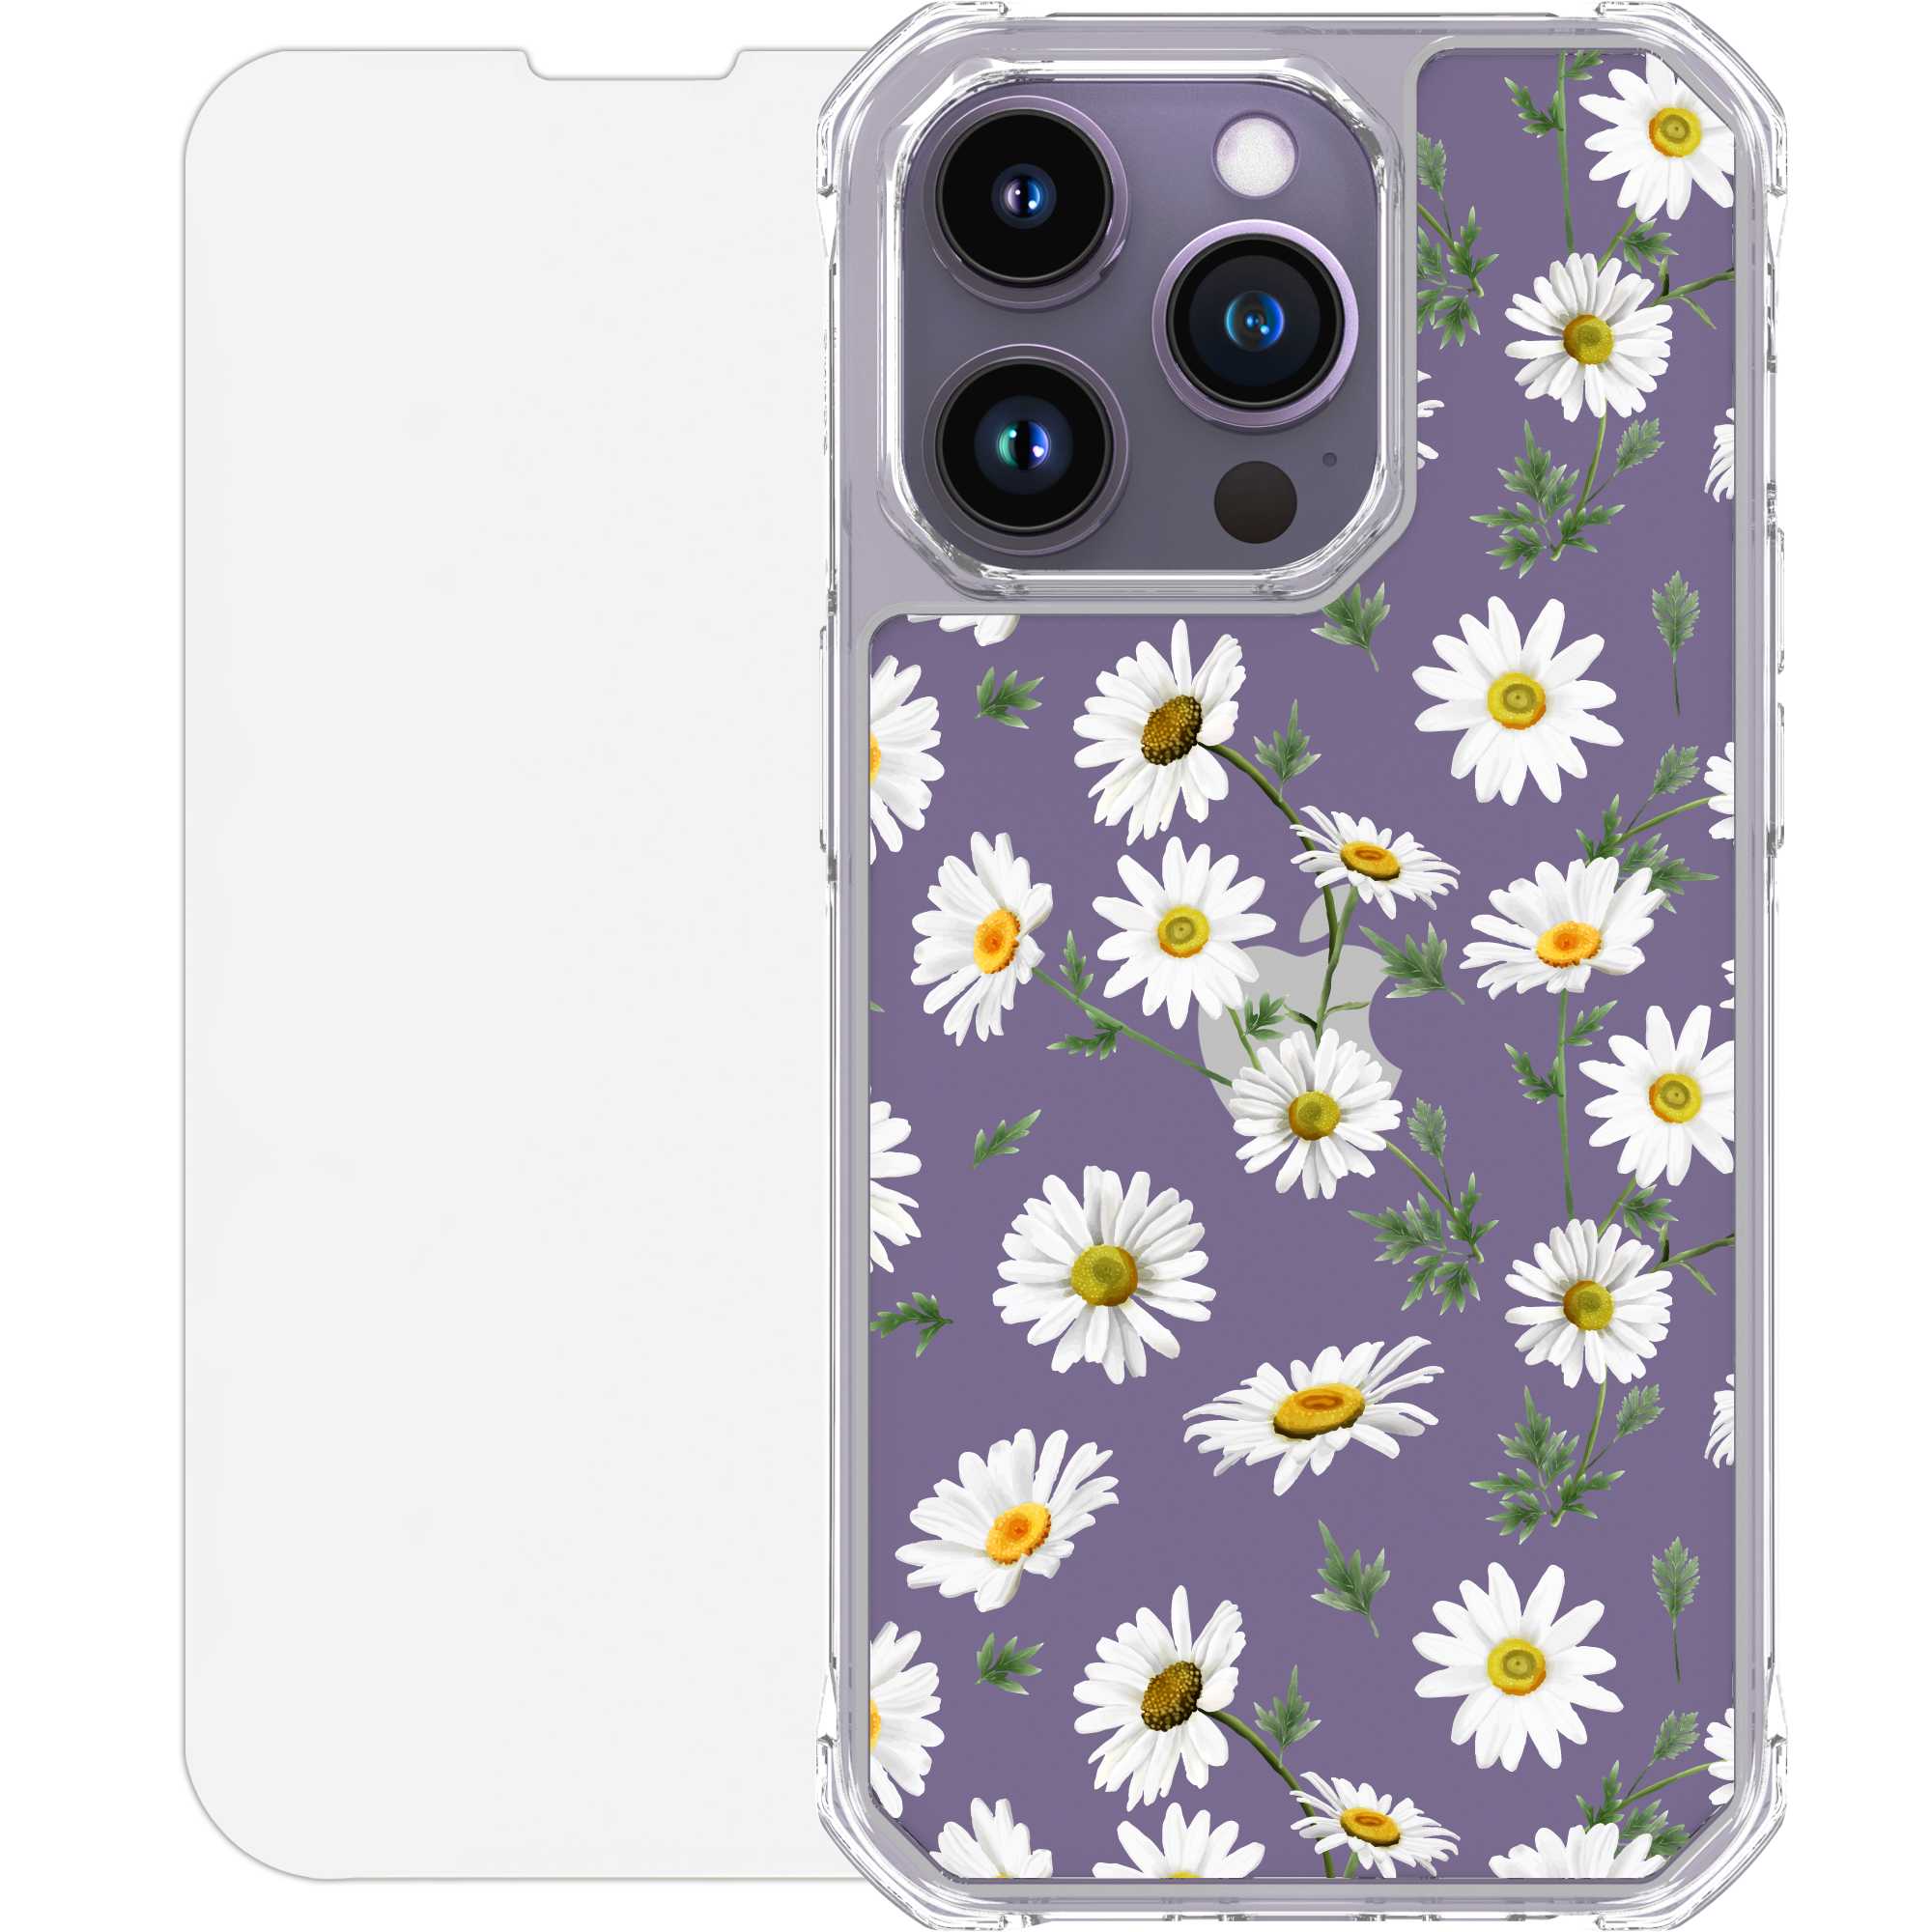 Scooch CrystalCase for iPhone 14 Pro Daisies Scooch CrystalCase